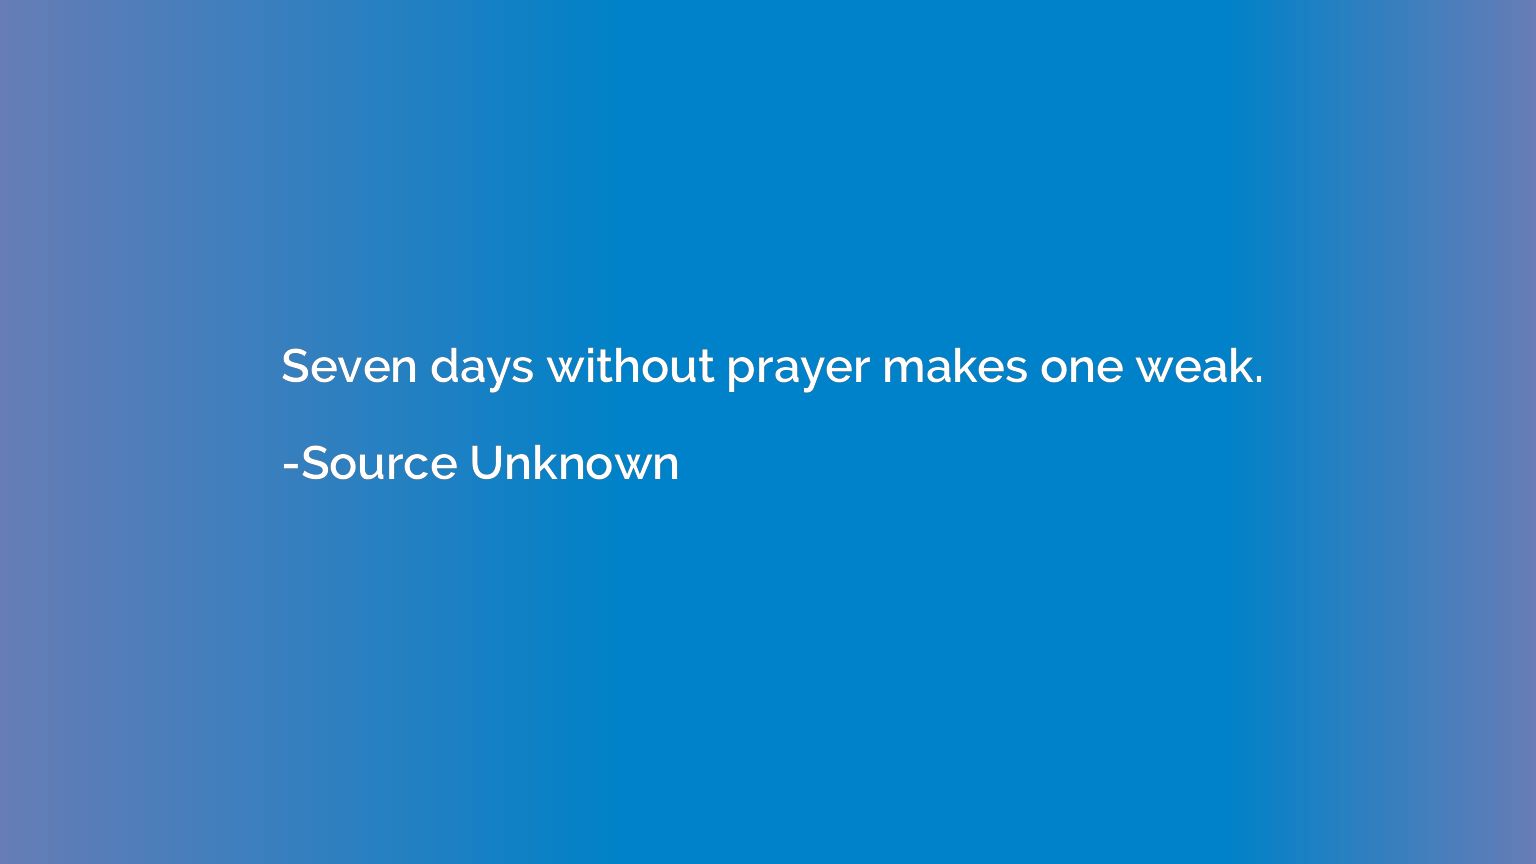 Seven days without prayer makes one weak.